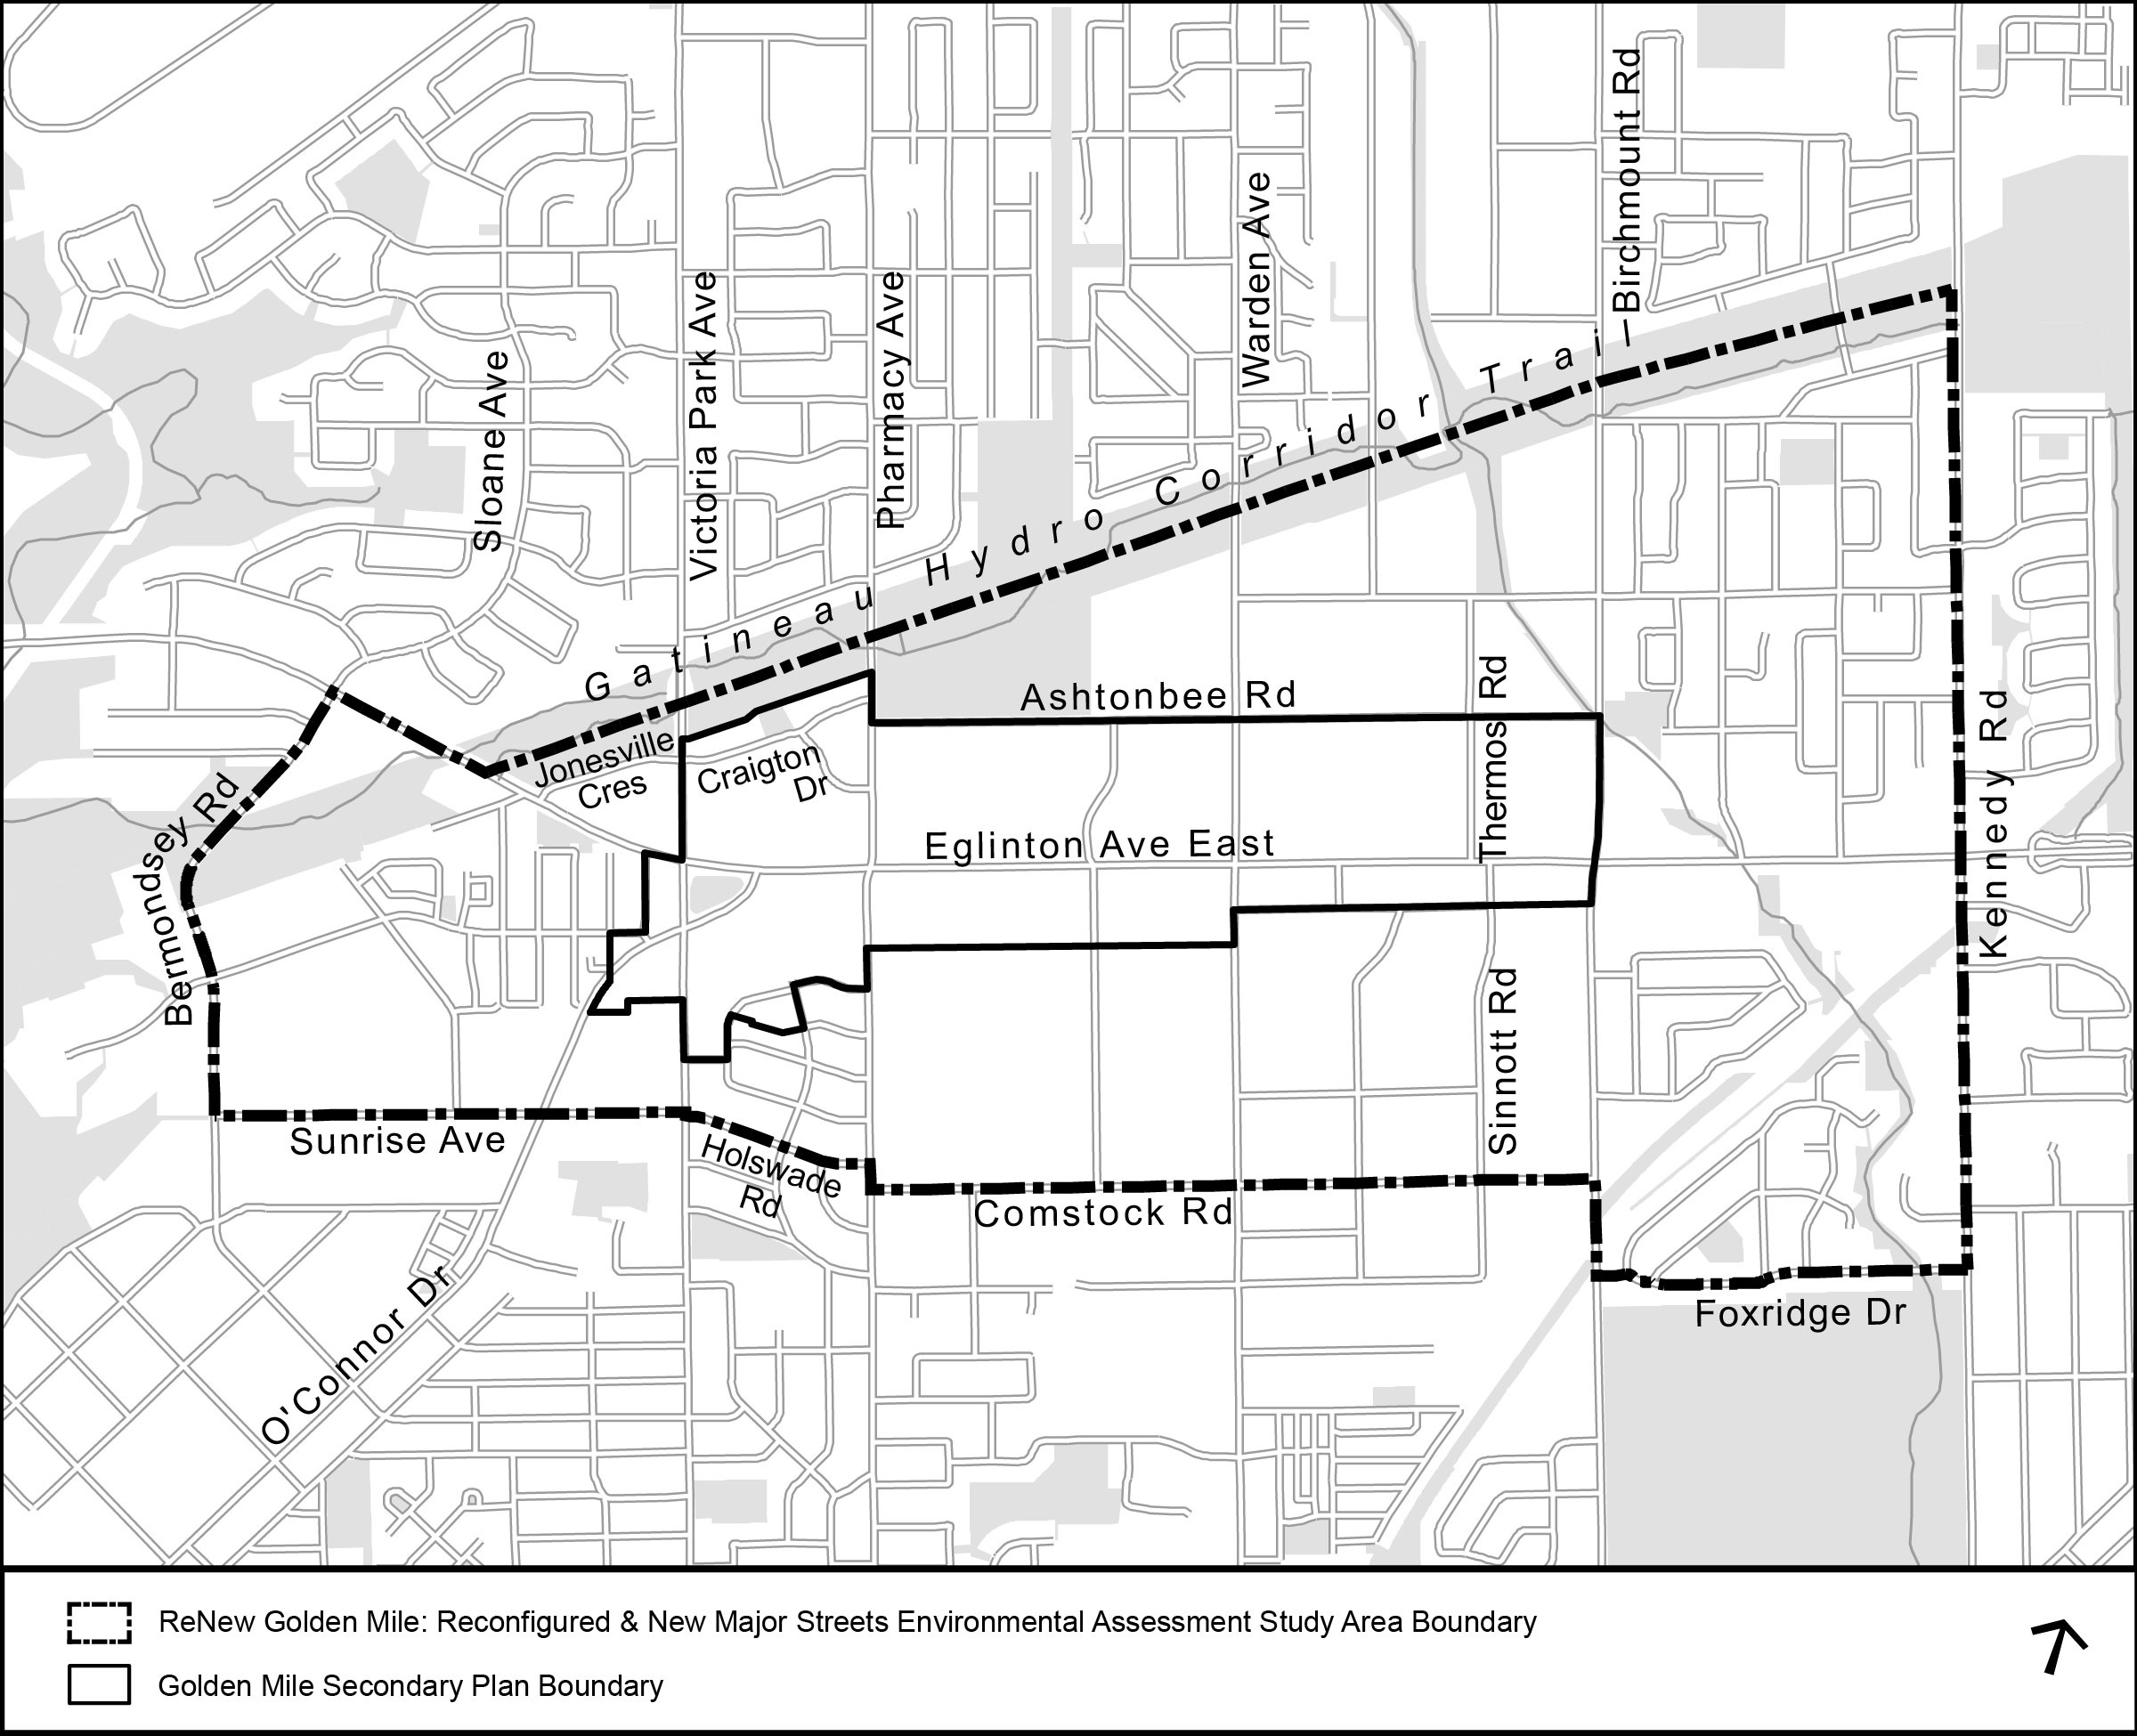 This map highlights the boundaries of the study area. The study area is bound by Bermondsey Road to the west, the Gatineau Hydro Corridor Trail to the north, Sunrise Avenue, Holswade Road, Comstock Road and Foxridge Drive to the south, and Kennedy Road to the east.